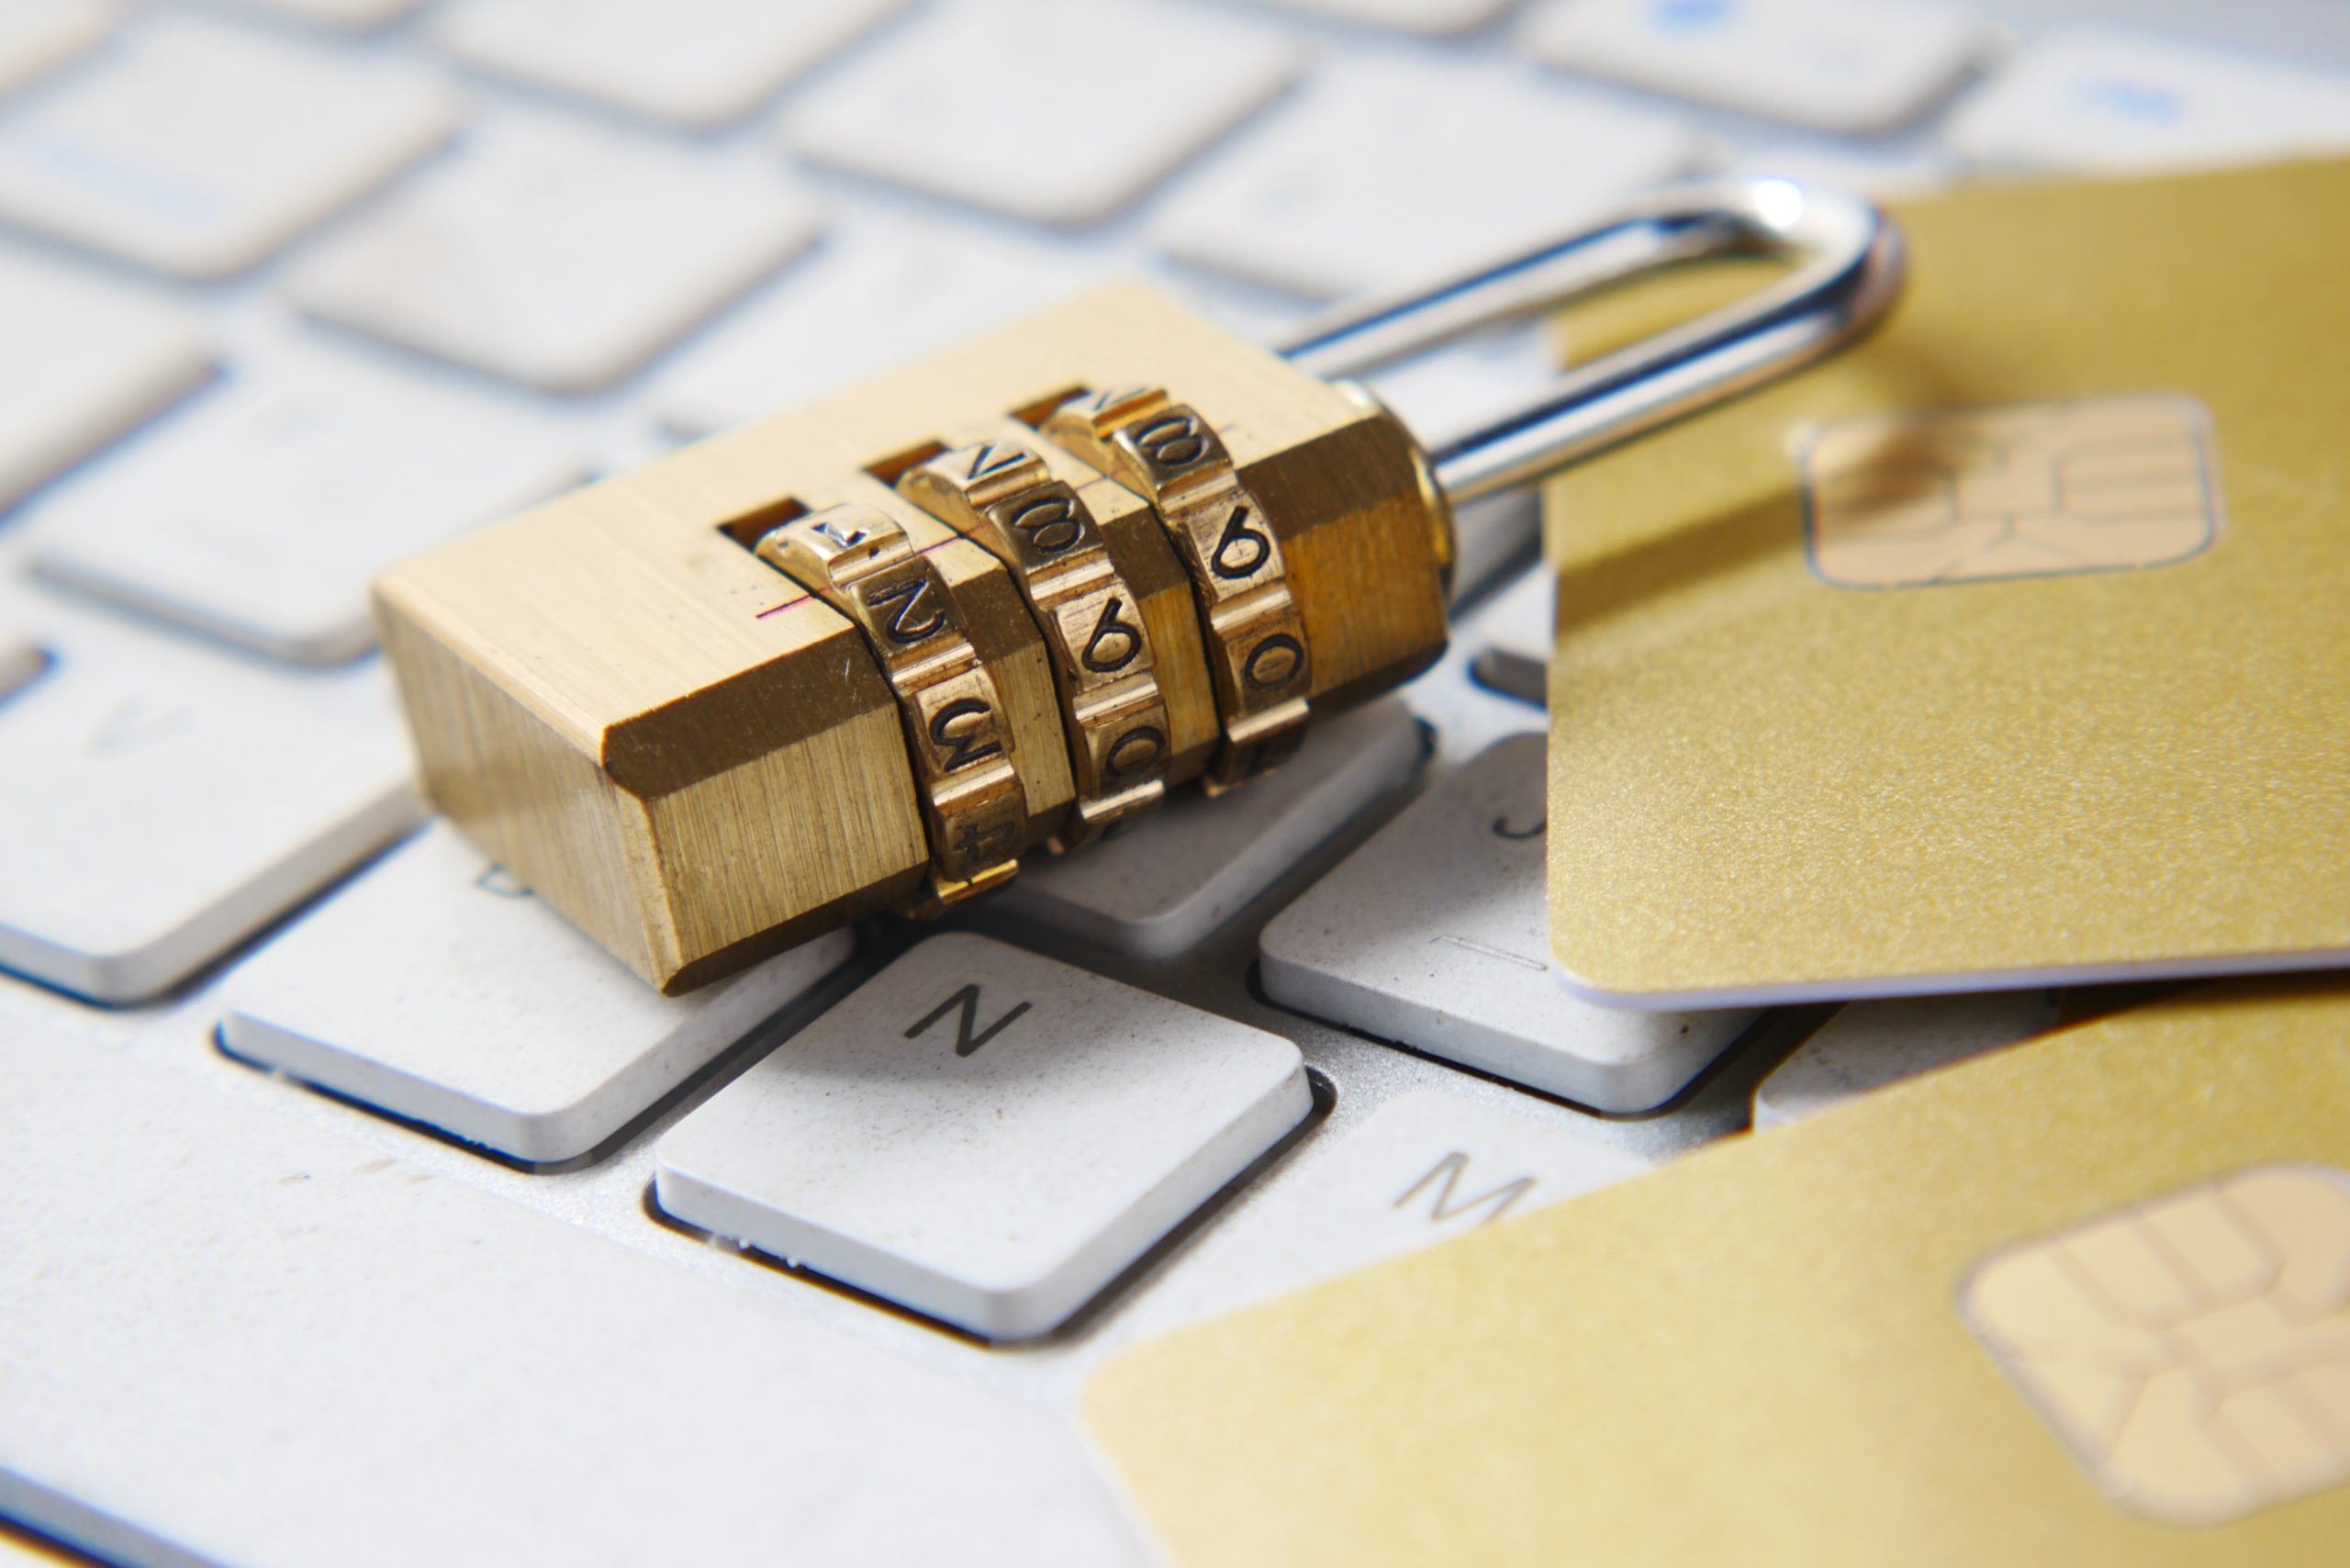 Airtight security policies are a must for online businesses